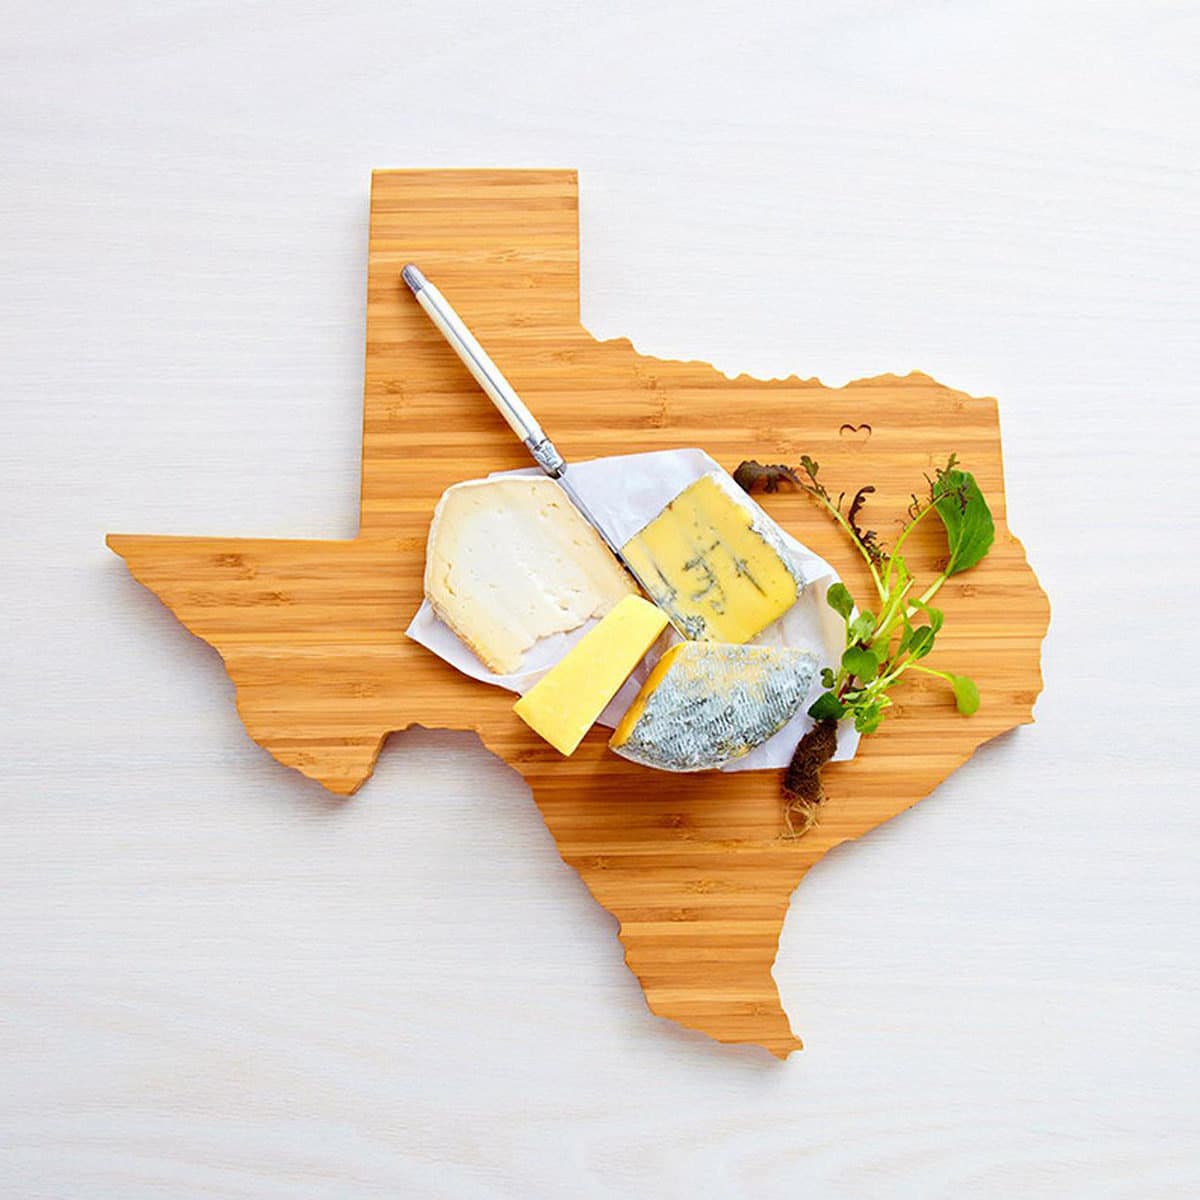 Unique wedding gift idea - state-shaped wood cutting boards